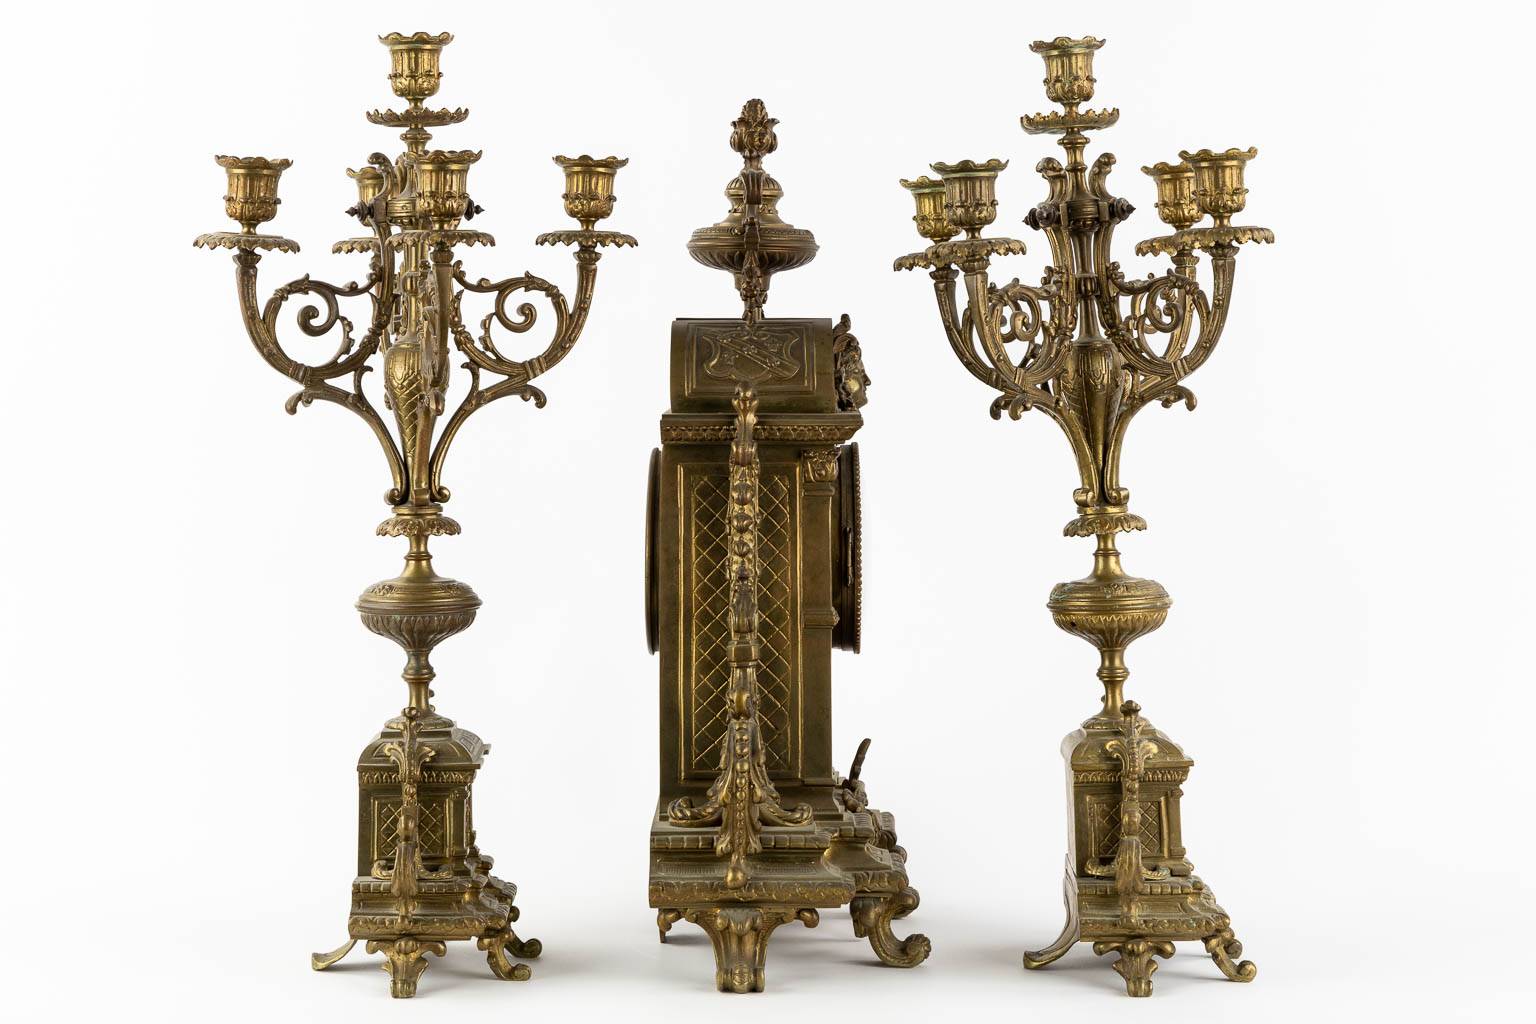 A three-piece mantle garniture clock and candelabra, patinated bronze. (L:16 x W:33 x H:50 cm) - Image 4 of 13